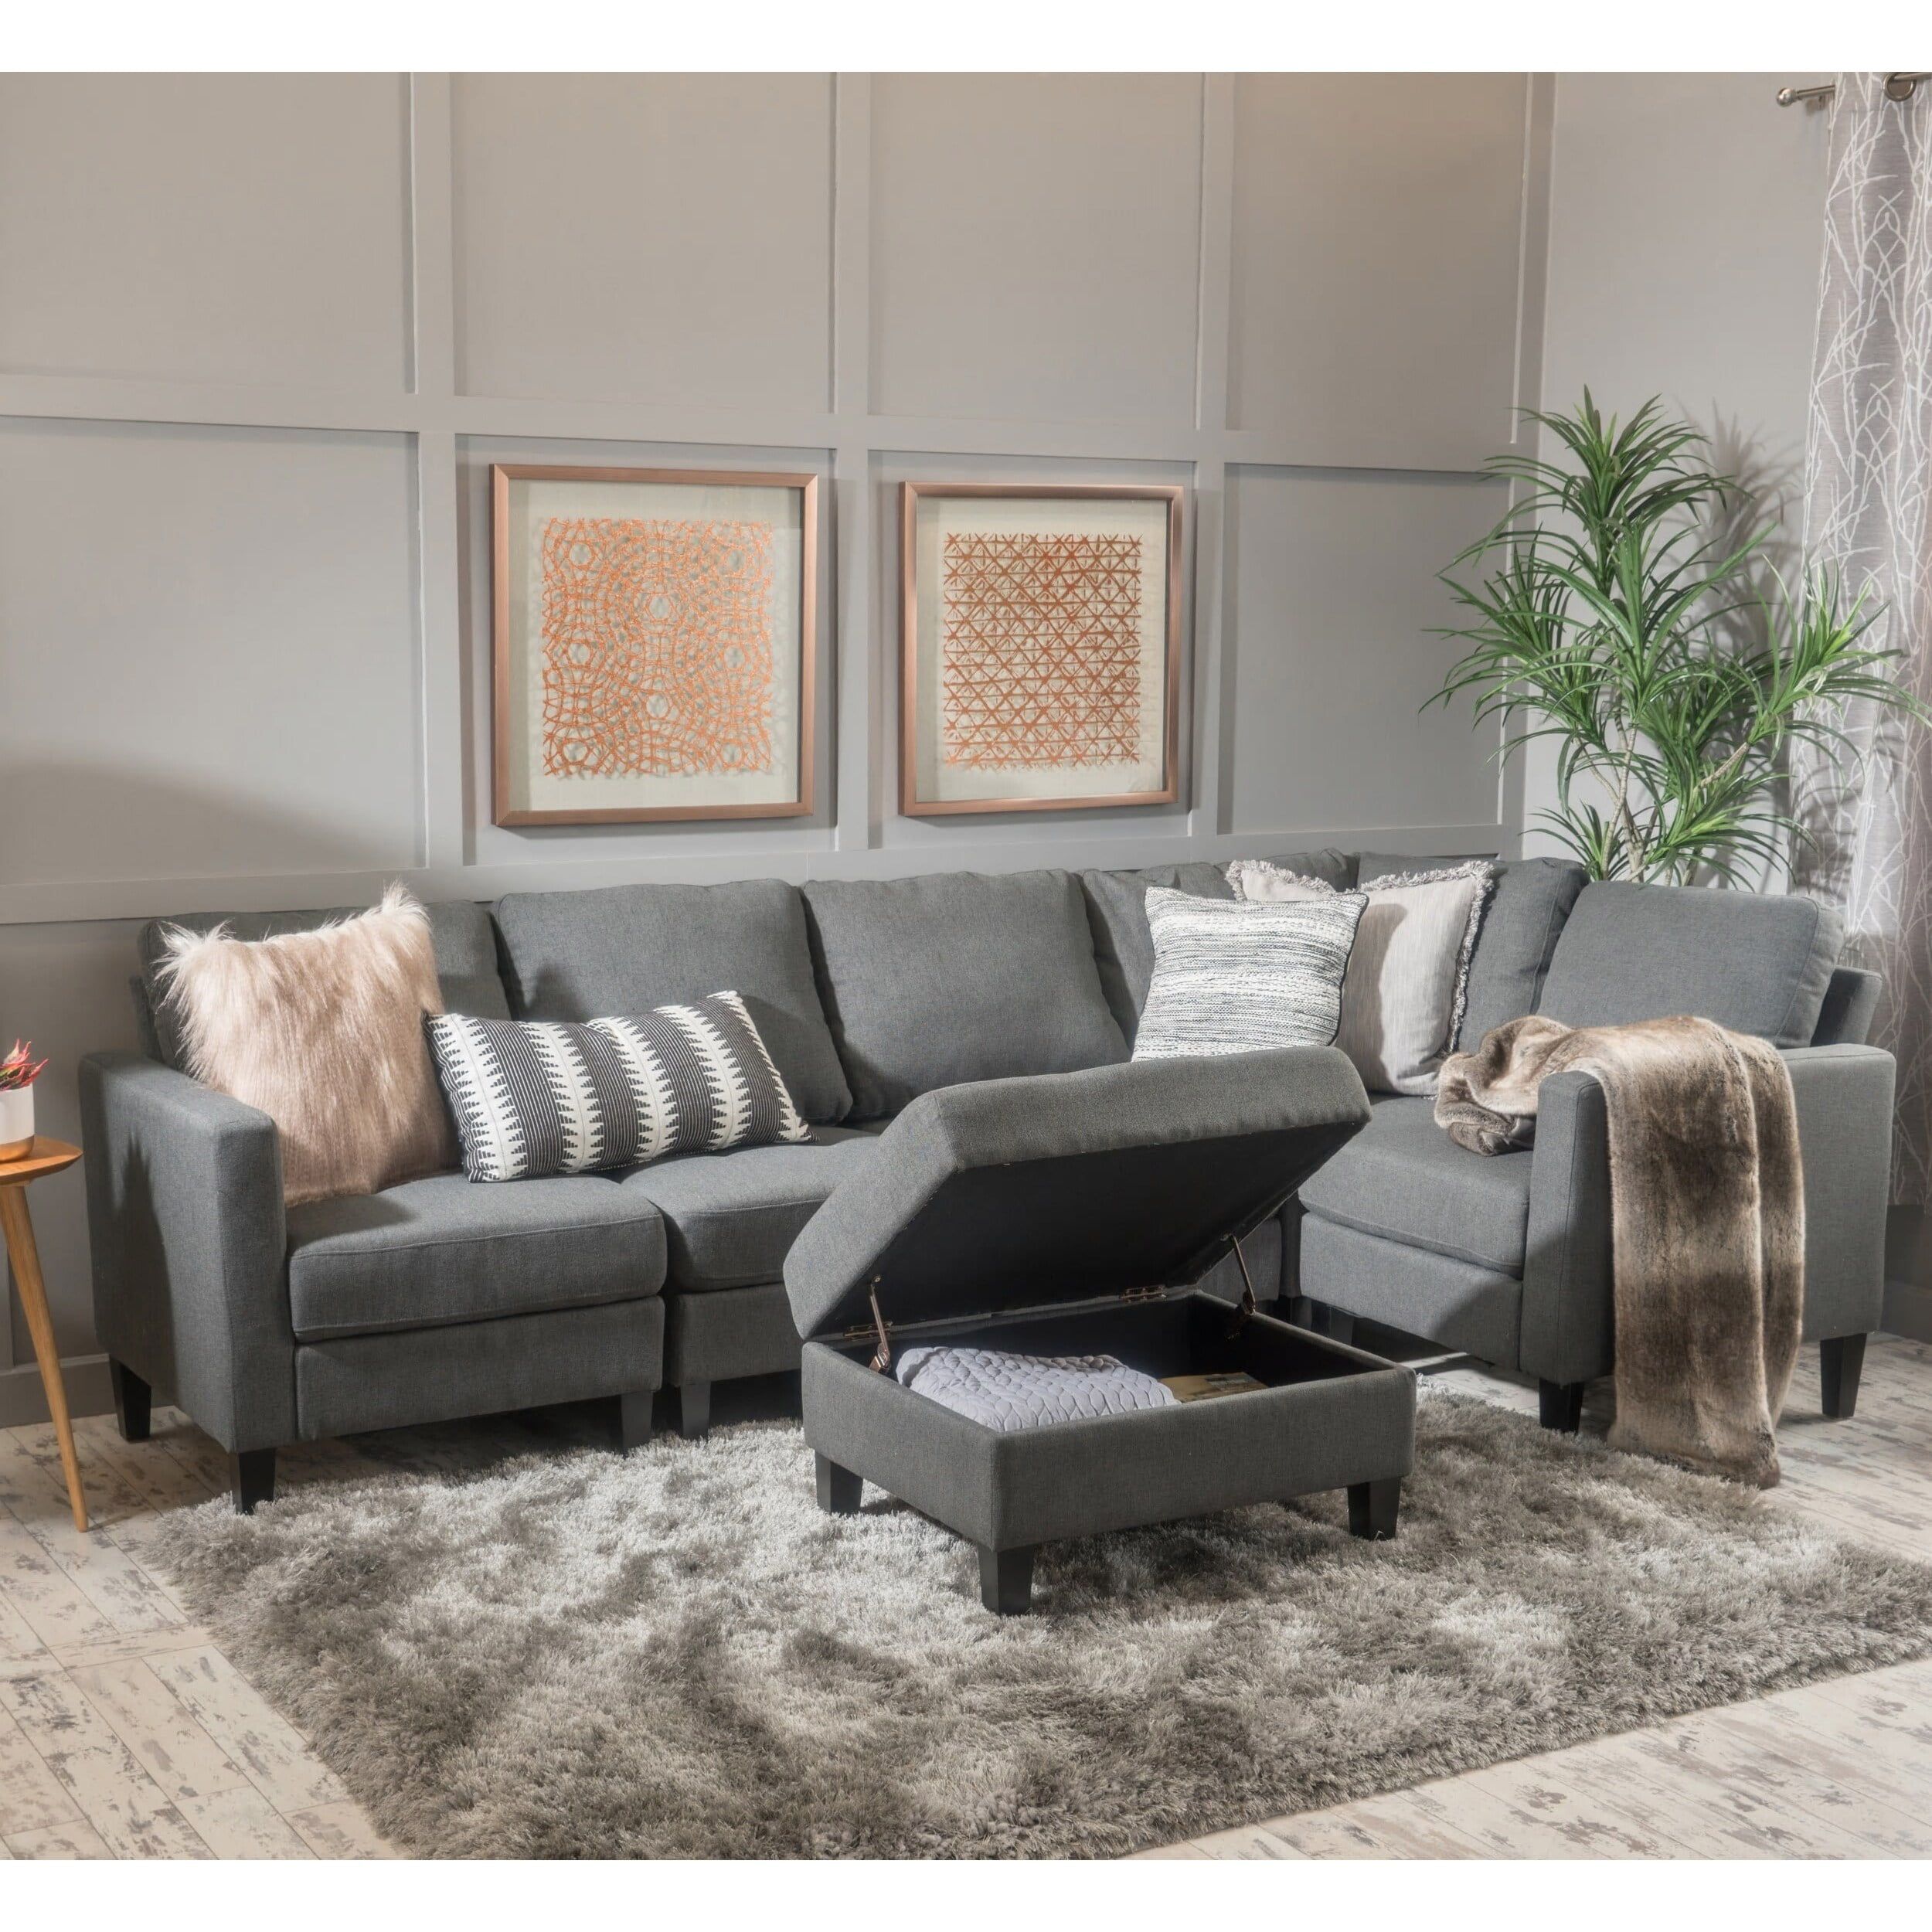 Christopher Knight Home Zahra 6 Piece Sofa Sectional With Storage With Regard To Sofas With Ottomans (View 8 of 20)